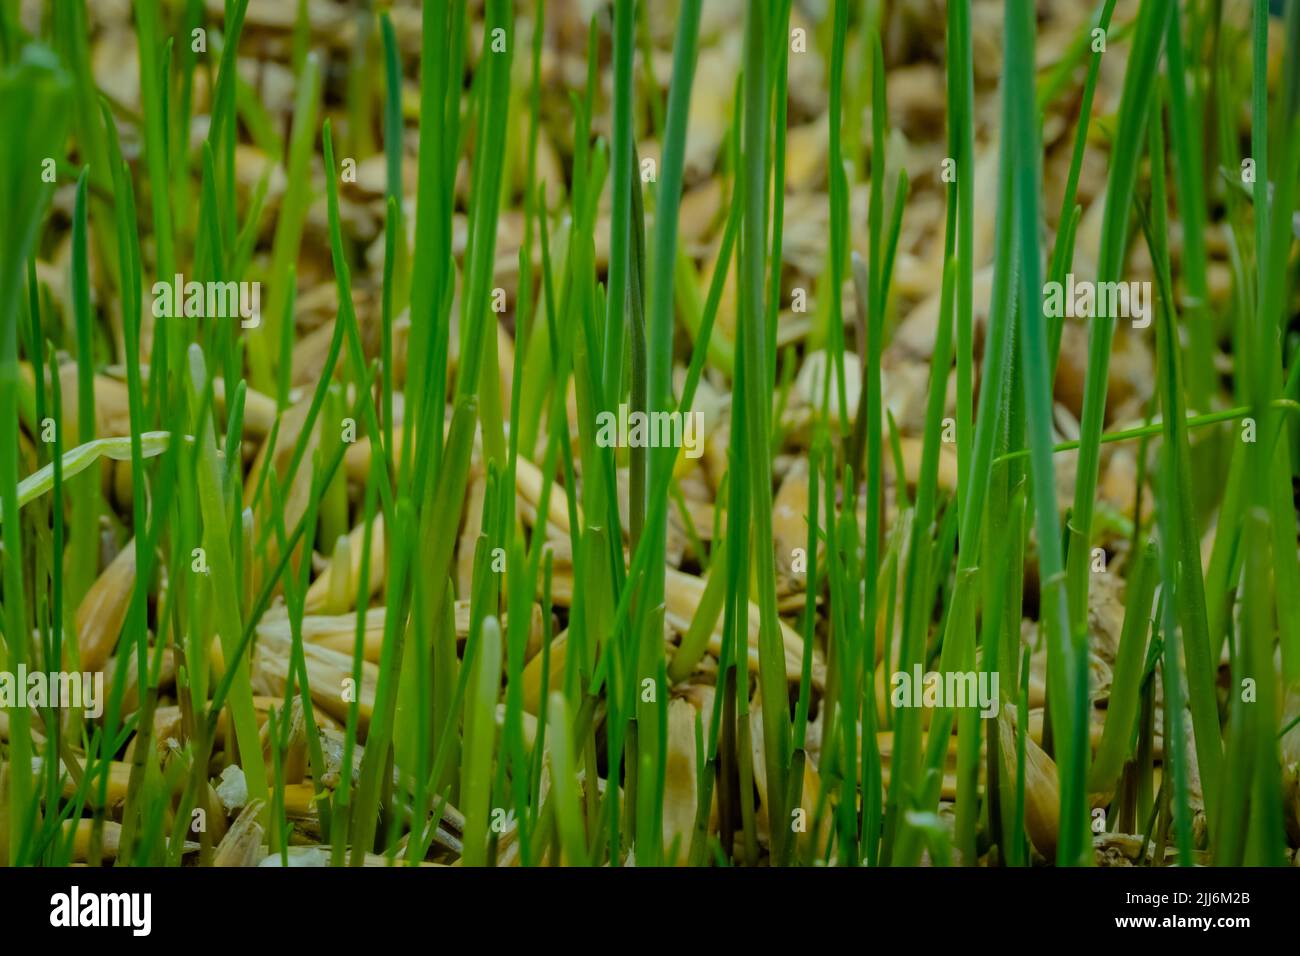 Fresh microgreens oat and wheat grass growing: close up view Stock Photo